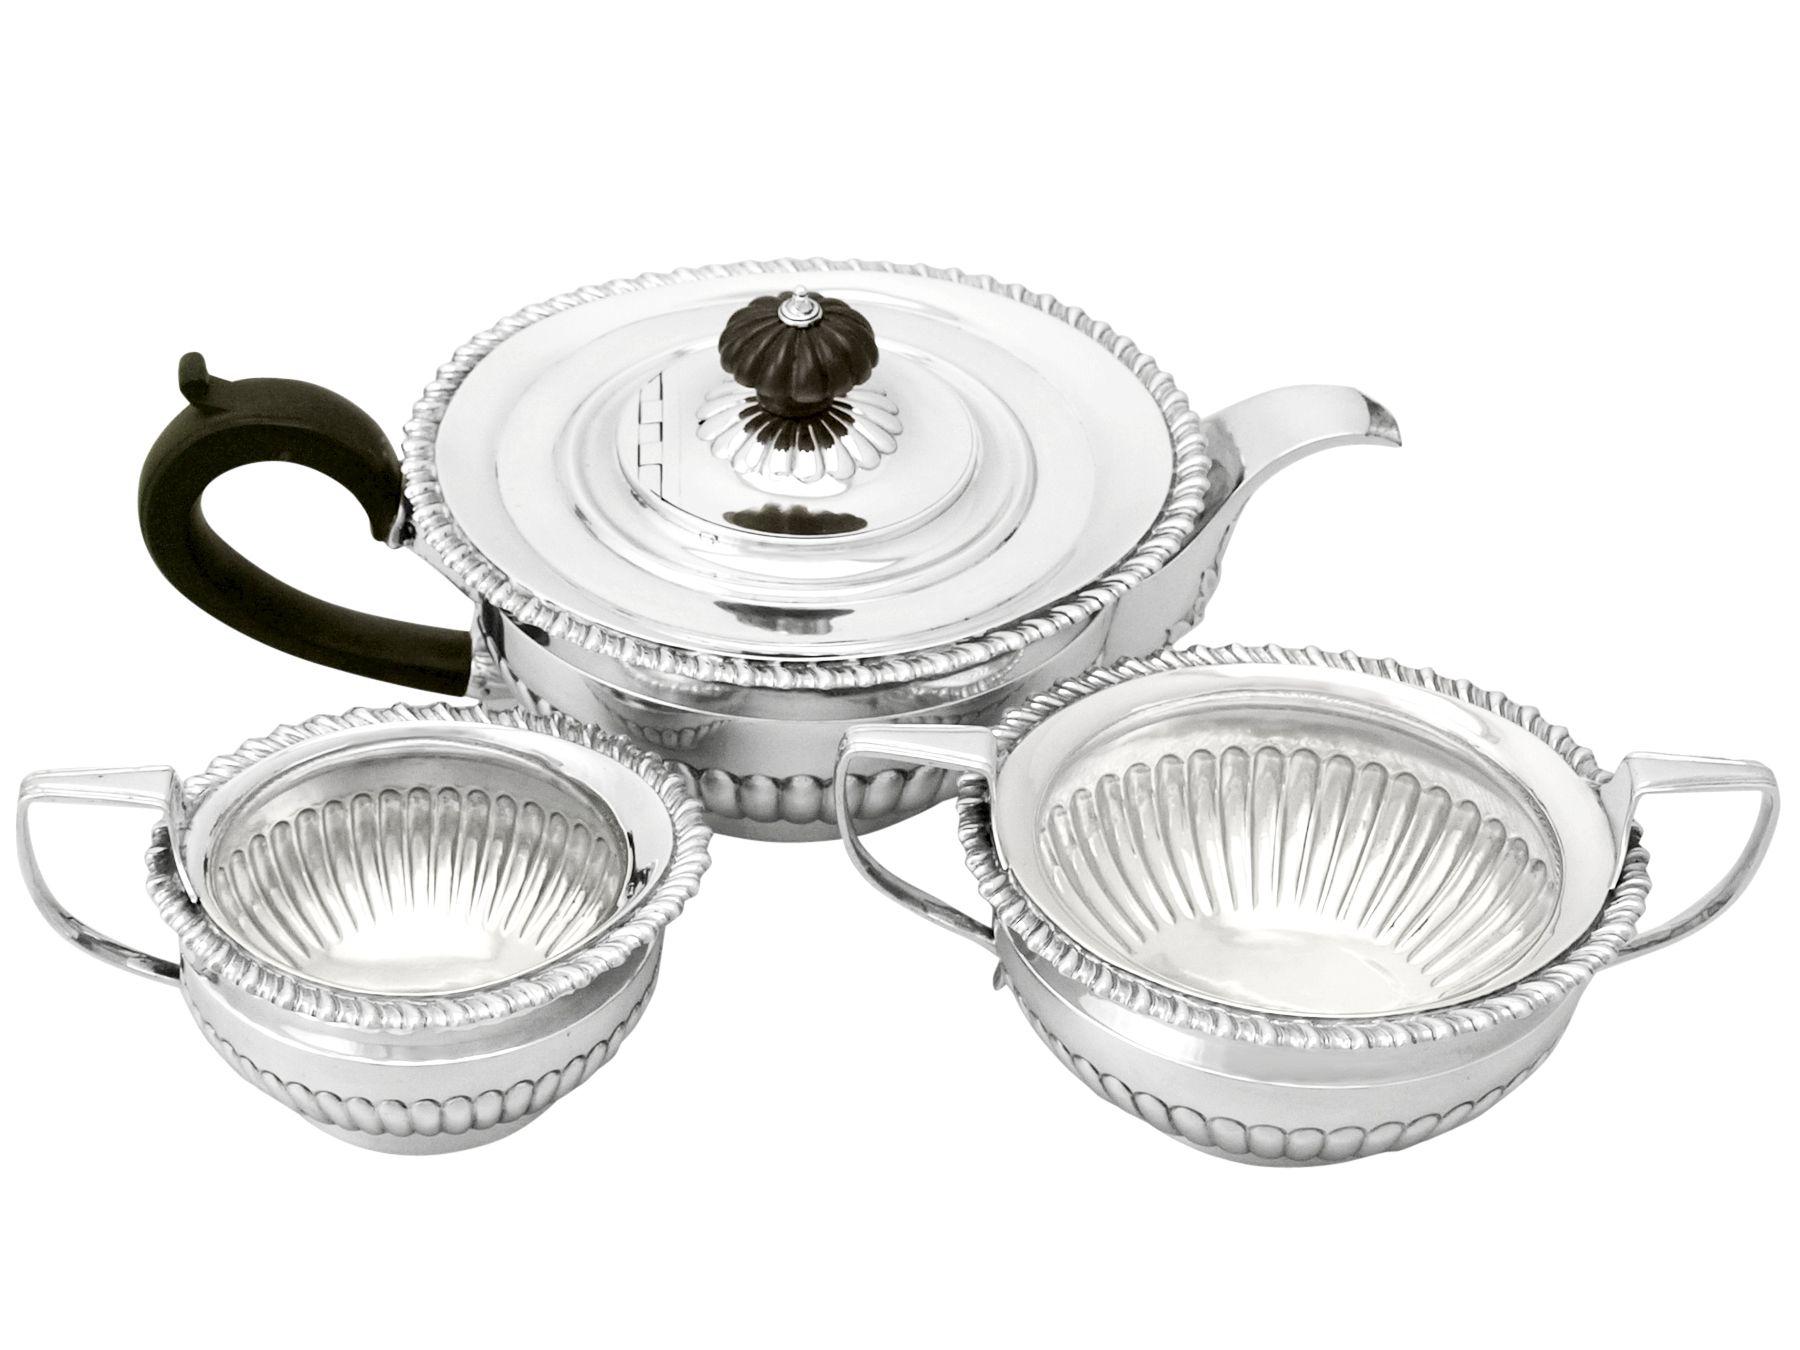 A fine and impressive antique Victorian English sterling silver three-piece tea set in the Queen Anne style; an addition to our silver teaware collection.

This fine antique Victorian sterling silver three-piece tea service consists of a teapot,